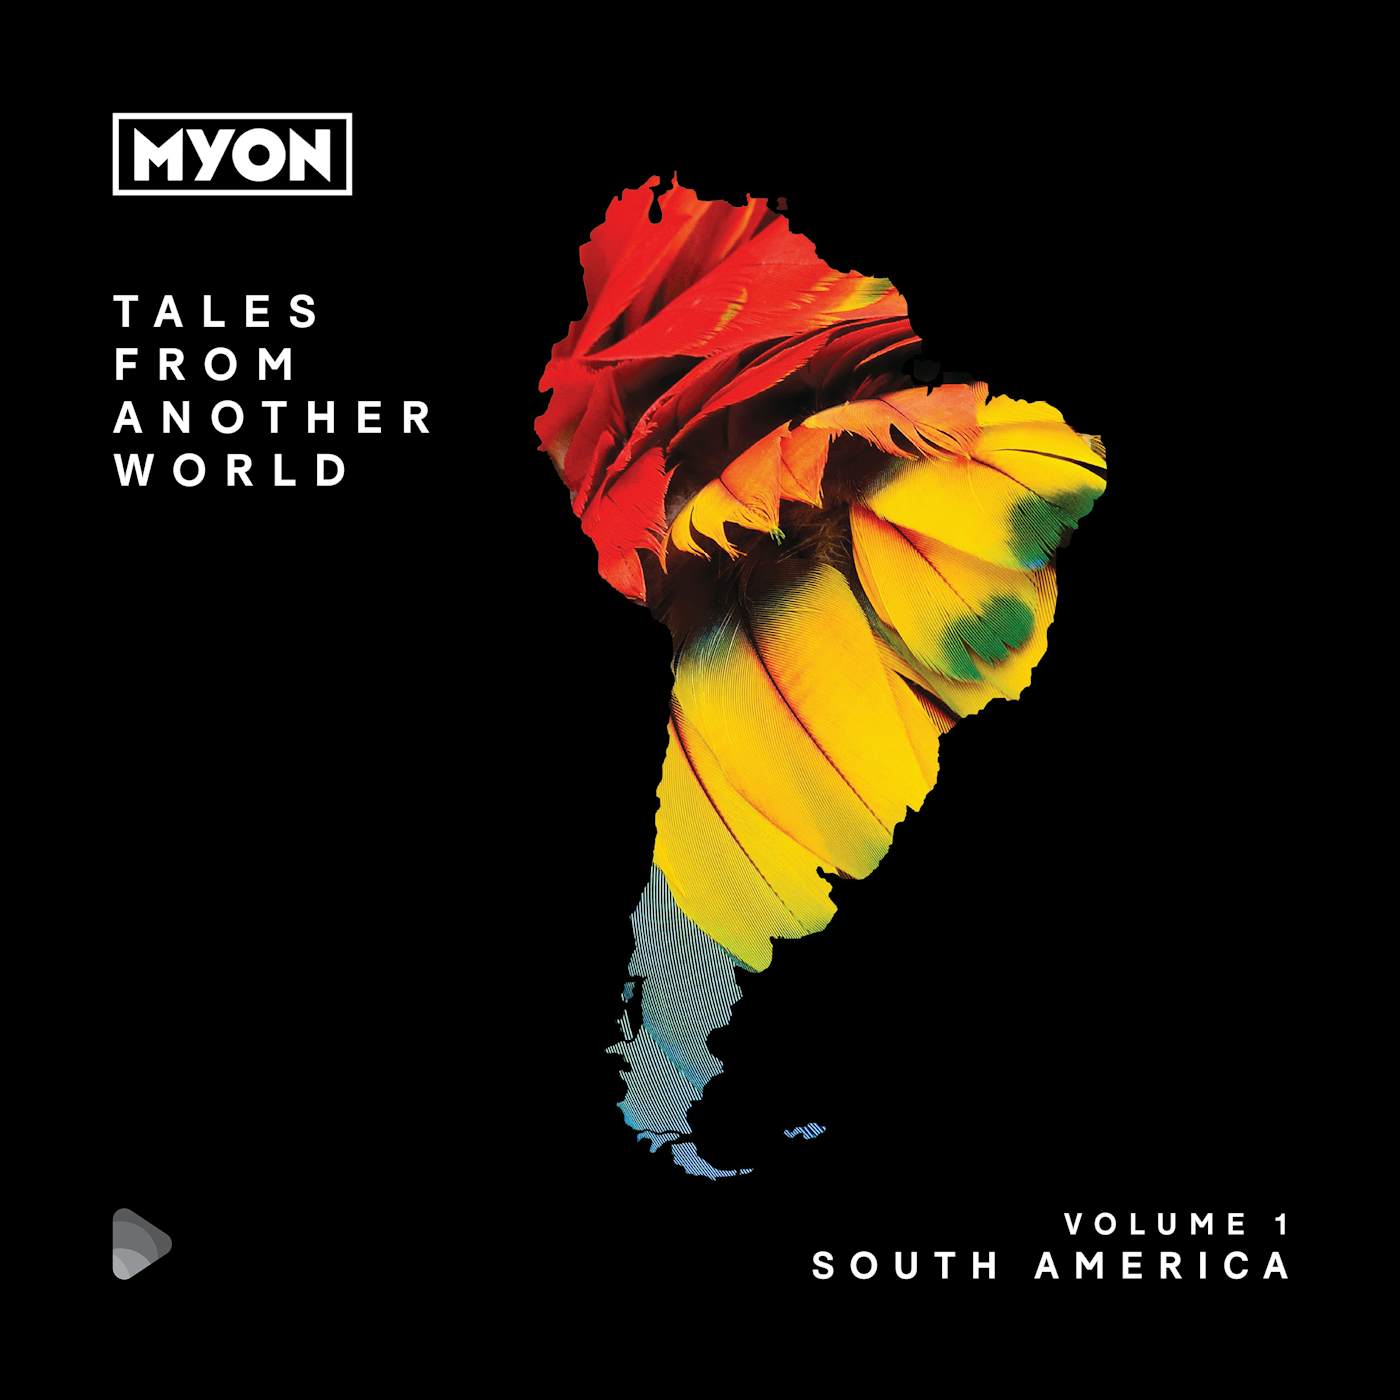 Myon TALES FROM ANOTHER WORLD: VOLUME 1 SOUTH AMERICA CD